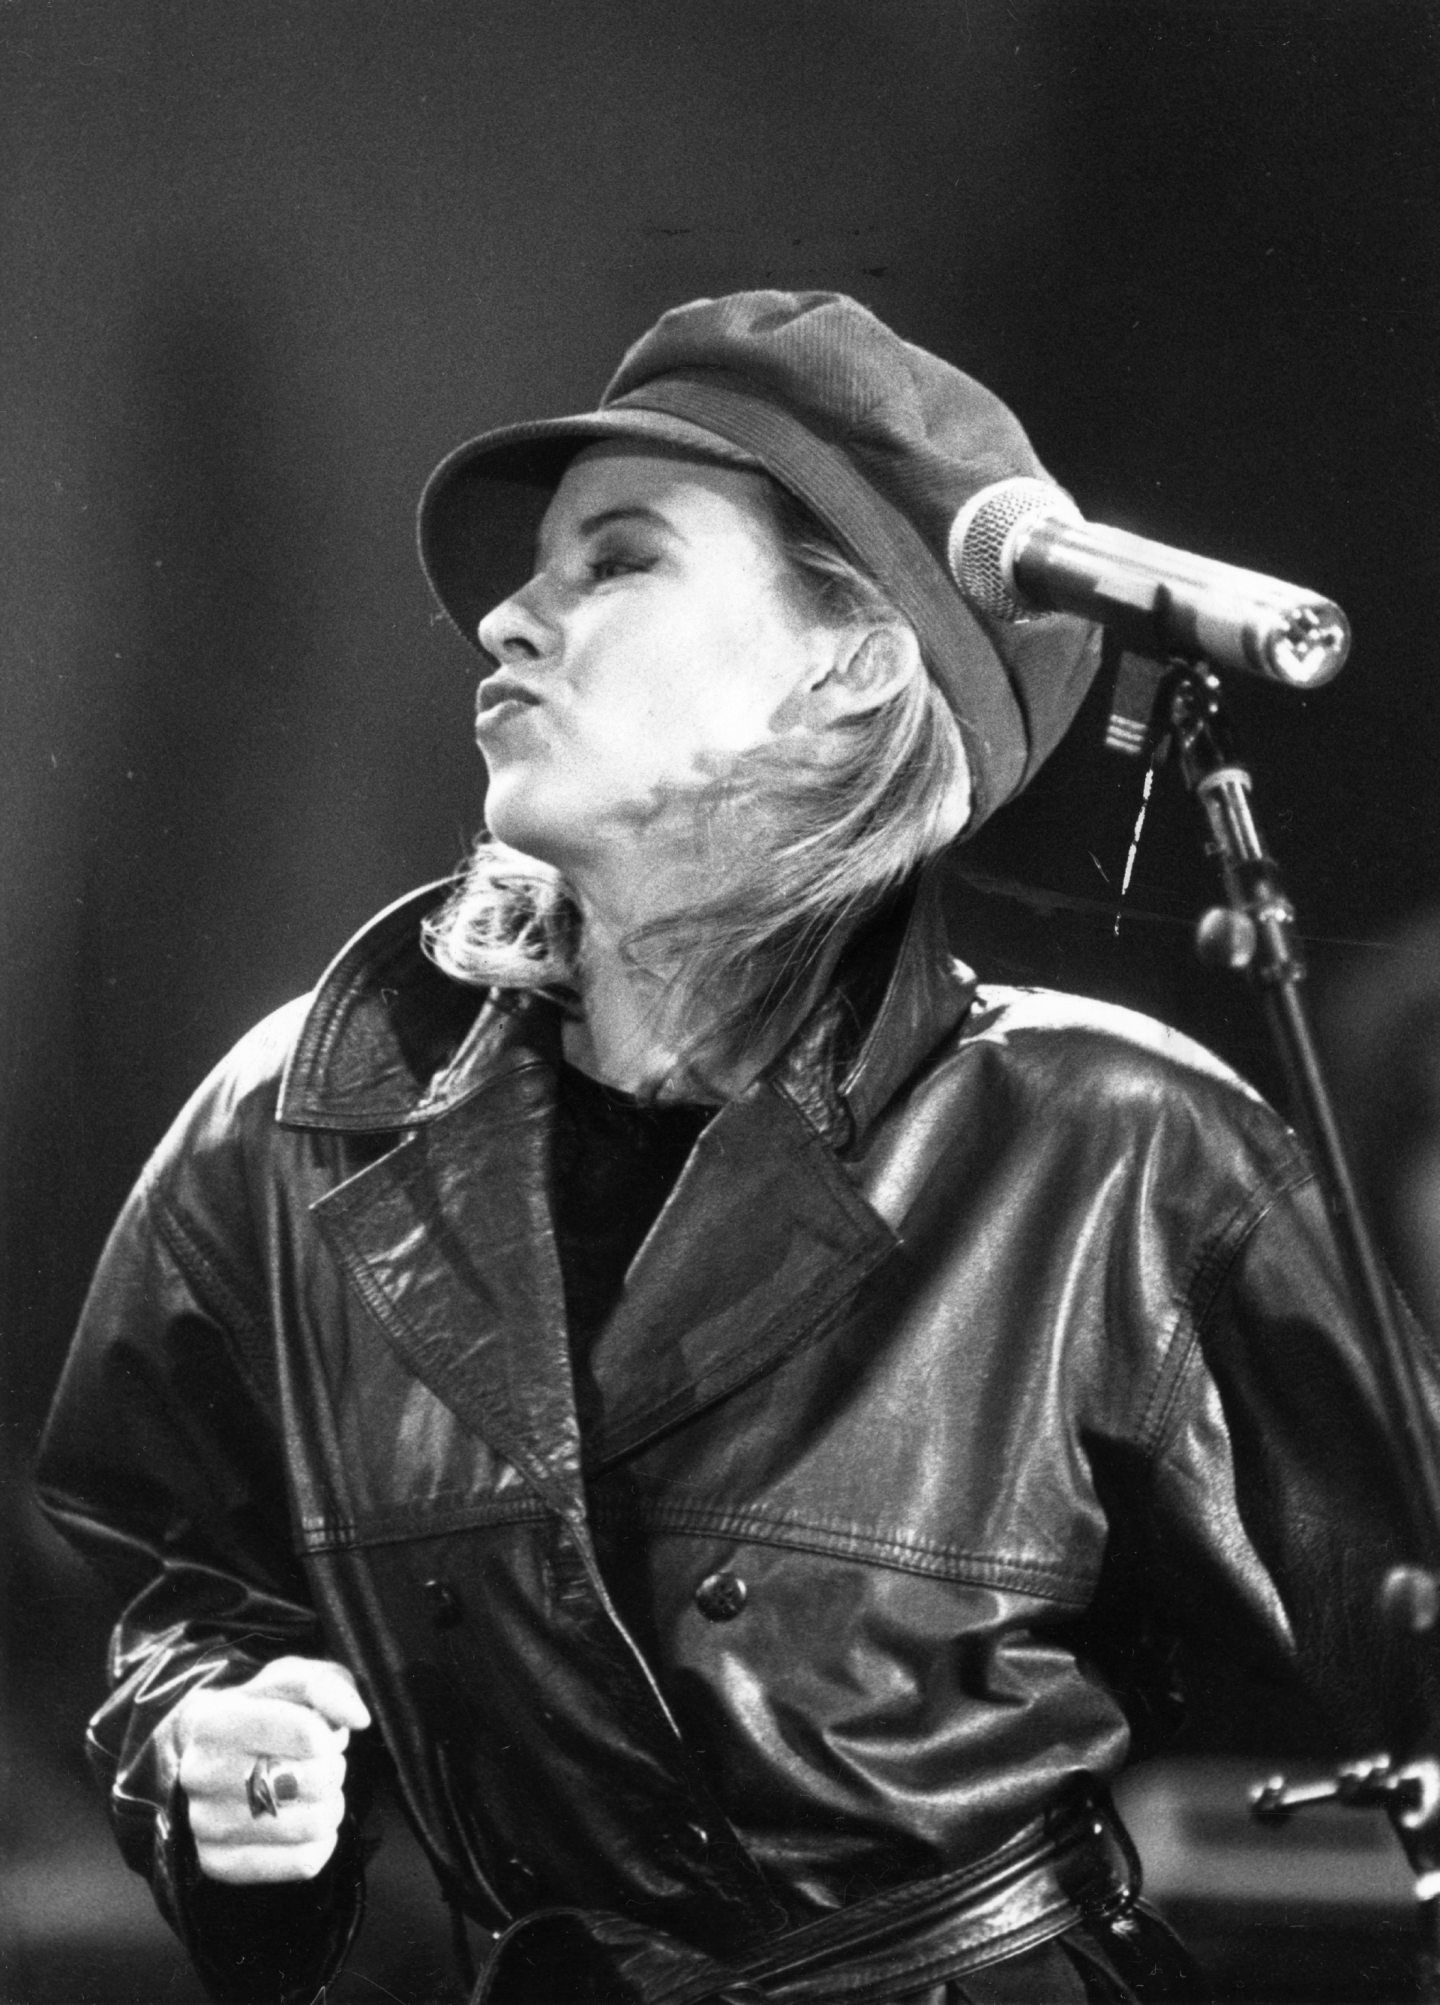 Kylie performing at the AECC in 1990.